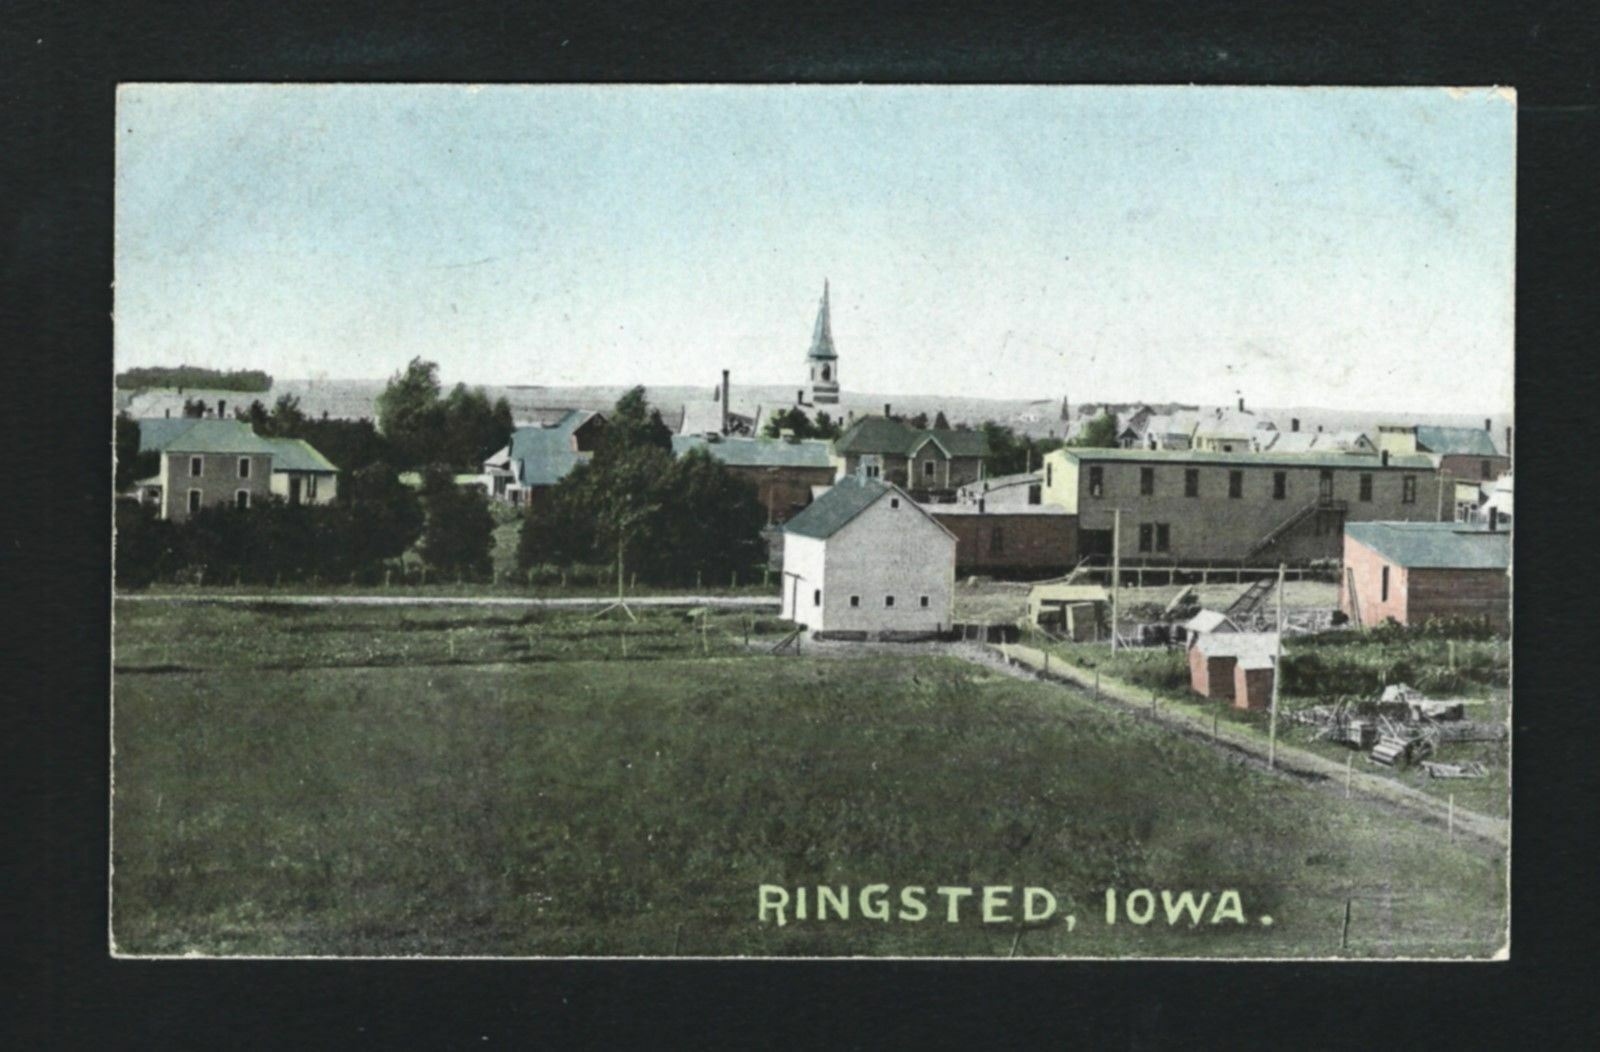 Ringsted Iowa IA c1907 Birdseye View of Town, Main Street District to the Right